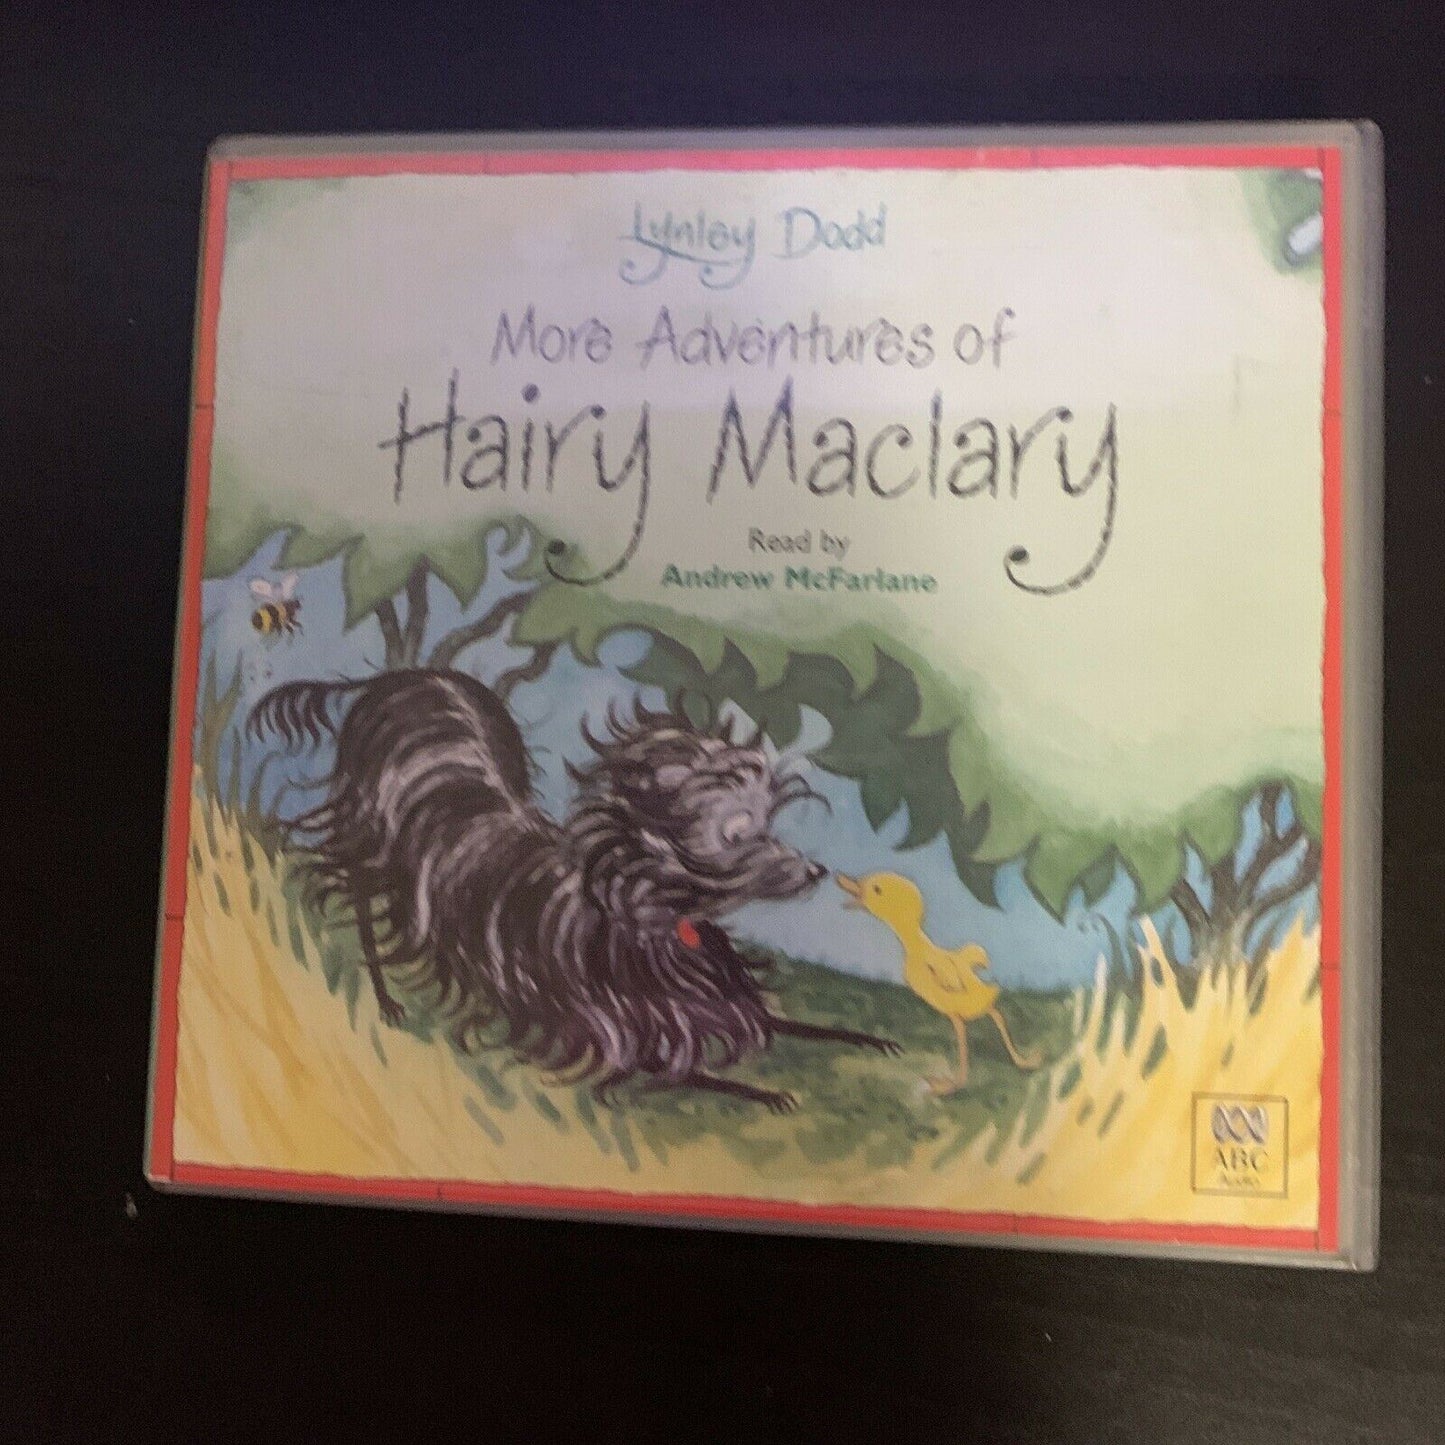 Lynley Dodd: More Adventures Of Hairy Maclary Read By Andrew McFarlane (CD)